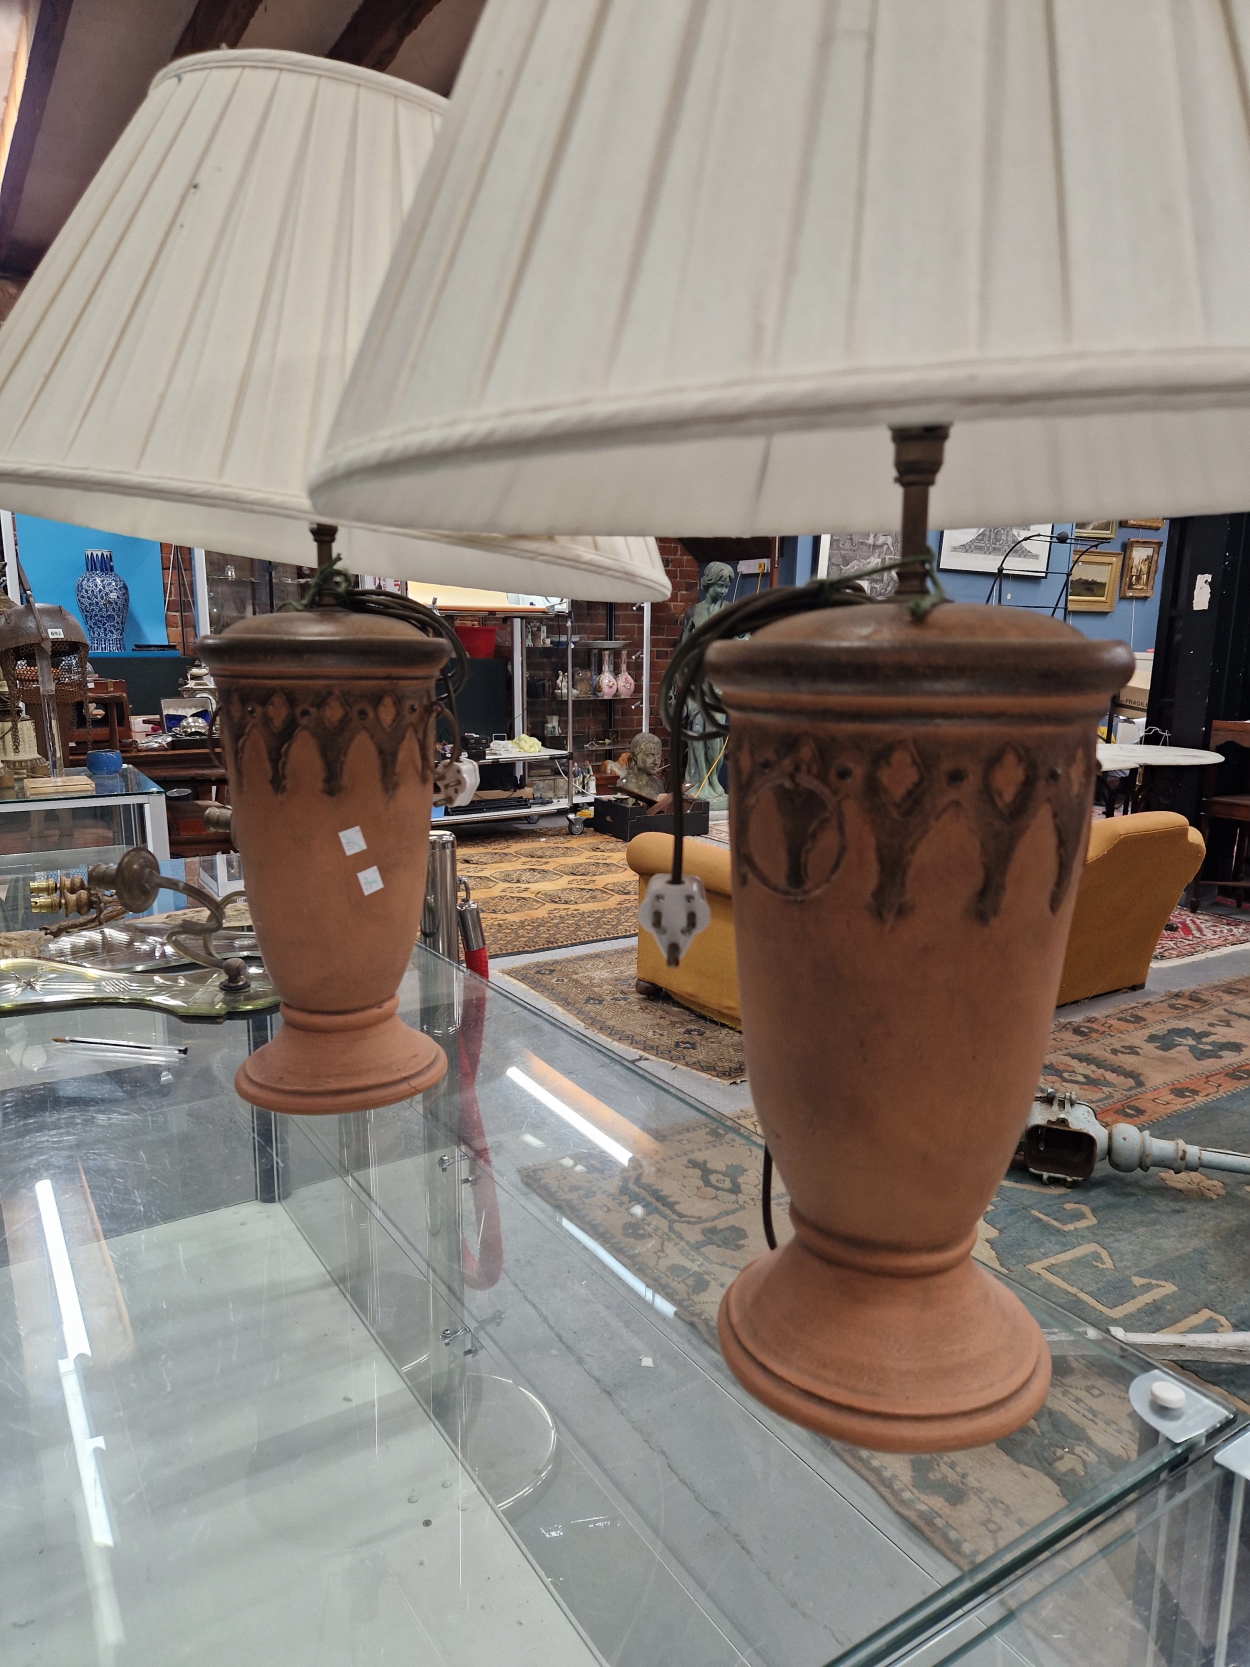 A PAIR OF TERRACOTTA TABLE LAMPS, THE SLENDER OVOID SHAPES RAISED ON CIRCULAR FEET, TO THE TOP OF